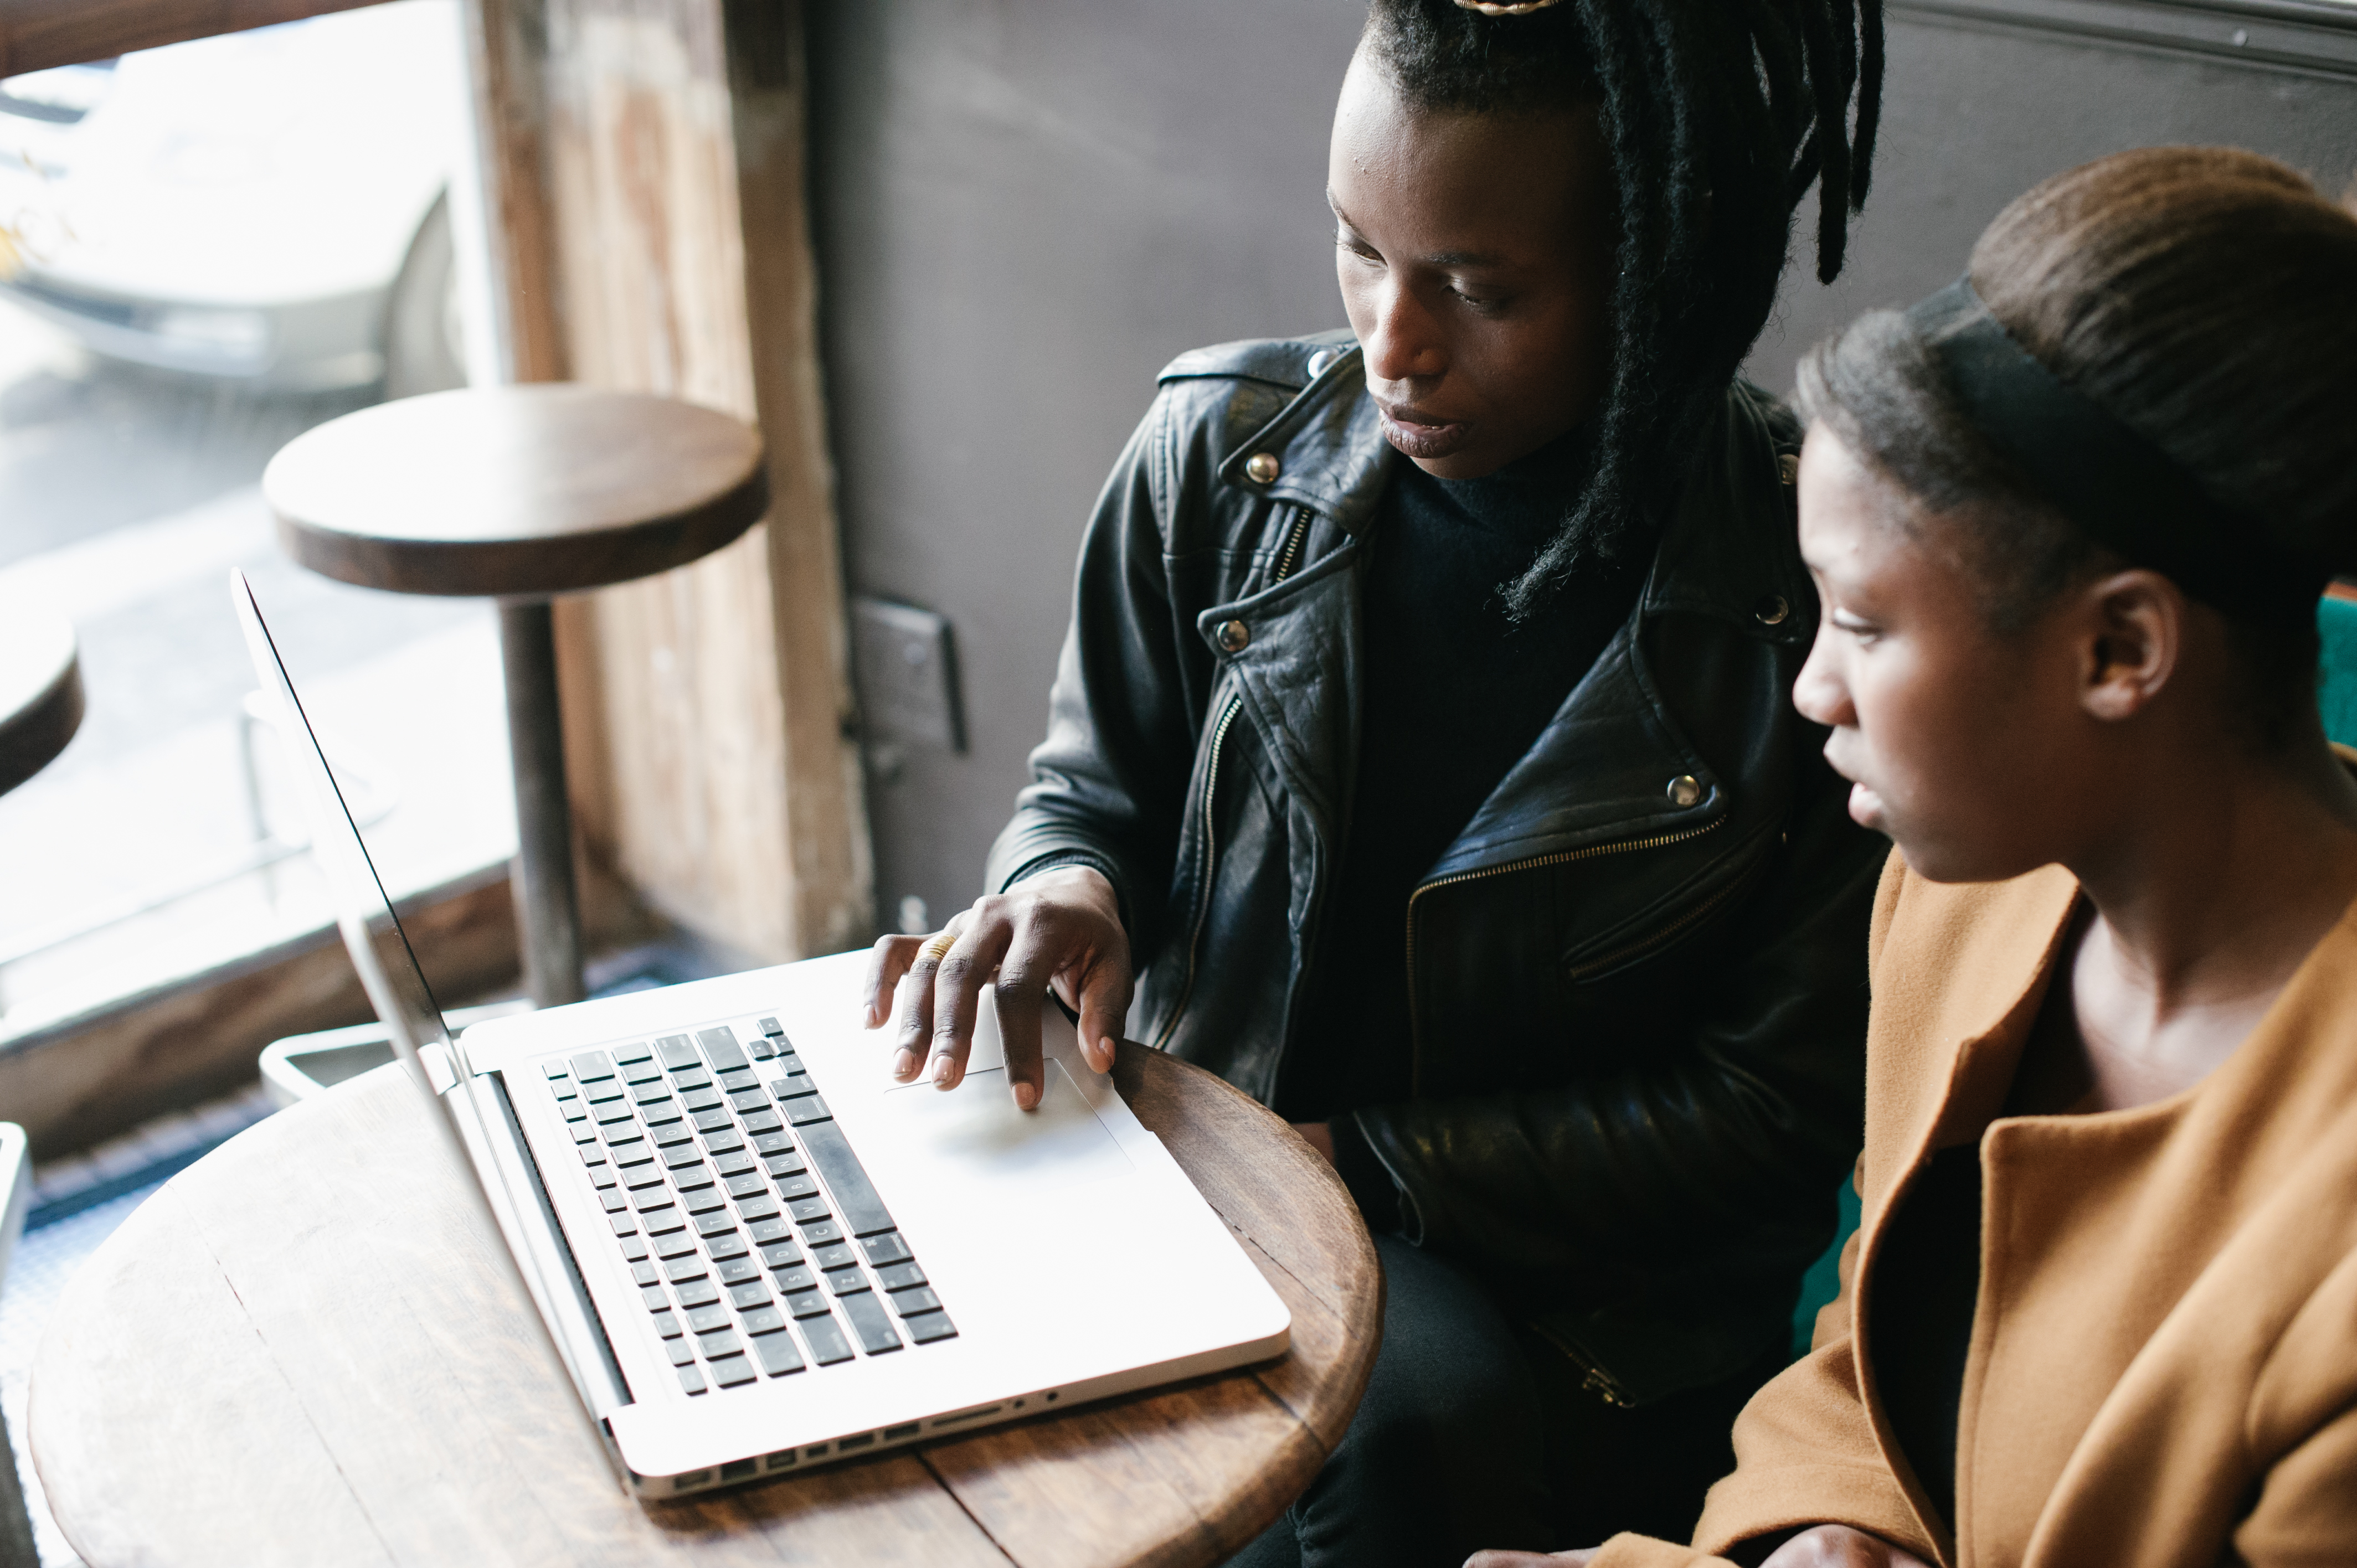 Two young black women sit at a round table, both reading from the same laptop. One, who is wearing a leather jacket, has her hand on the laptop trackpad.